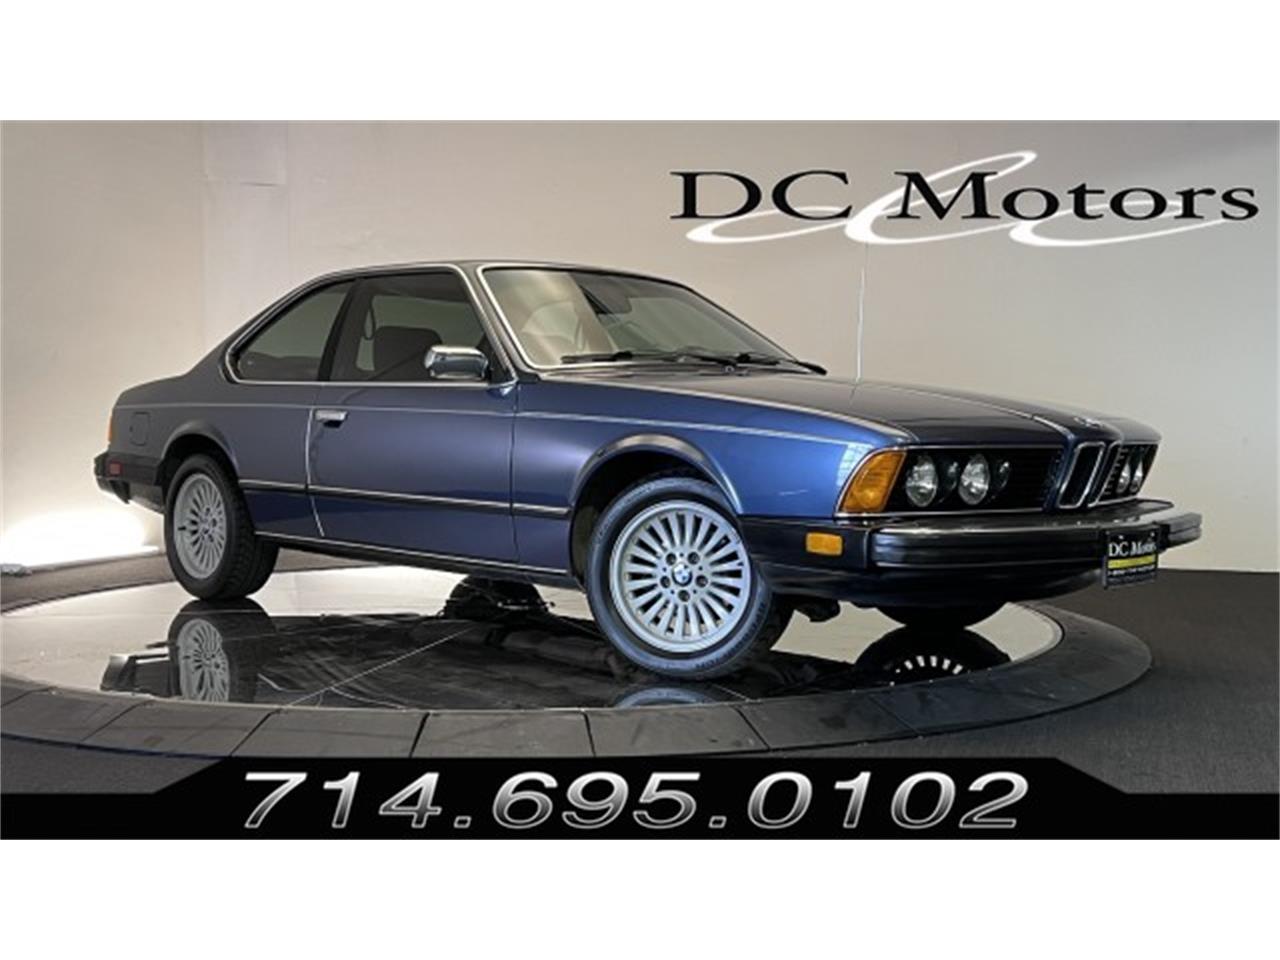 For Sale: 1982 BMW 6 Series in Anaheim, California for sale in Anaheim, CA